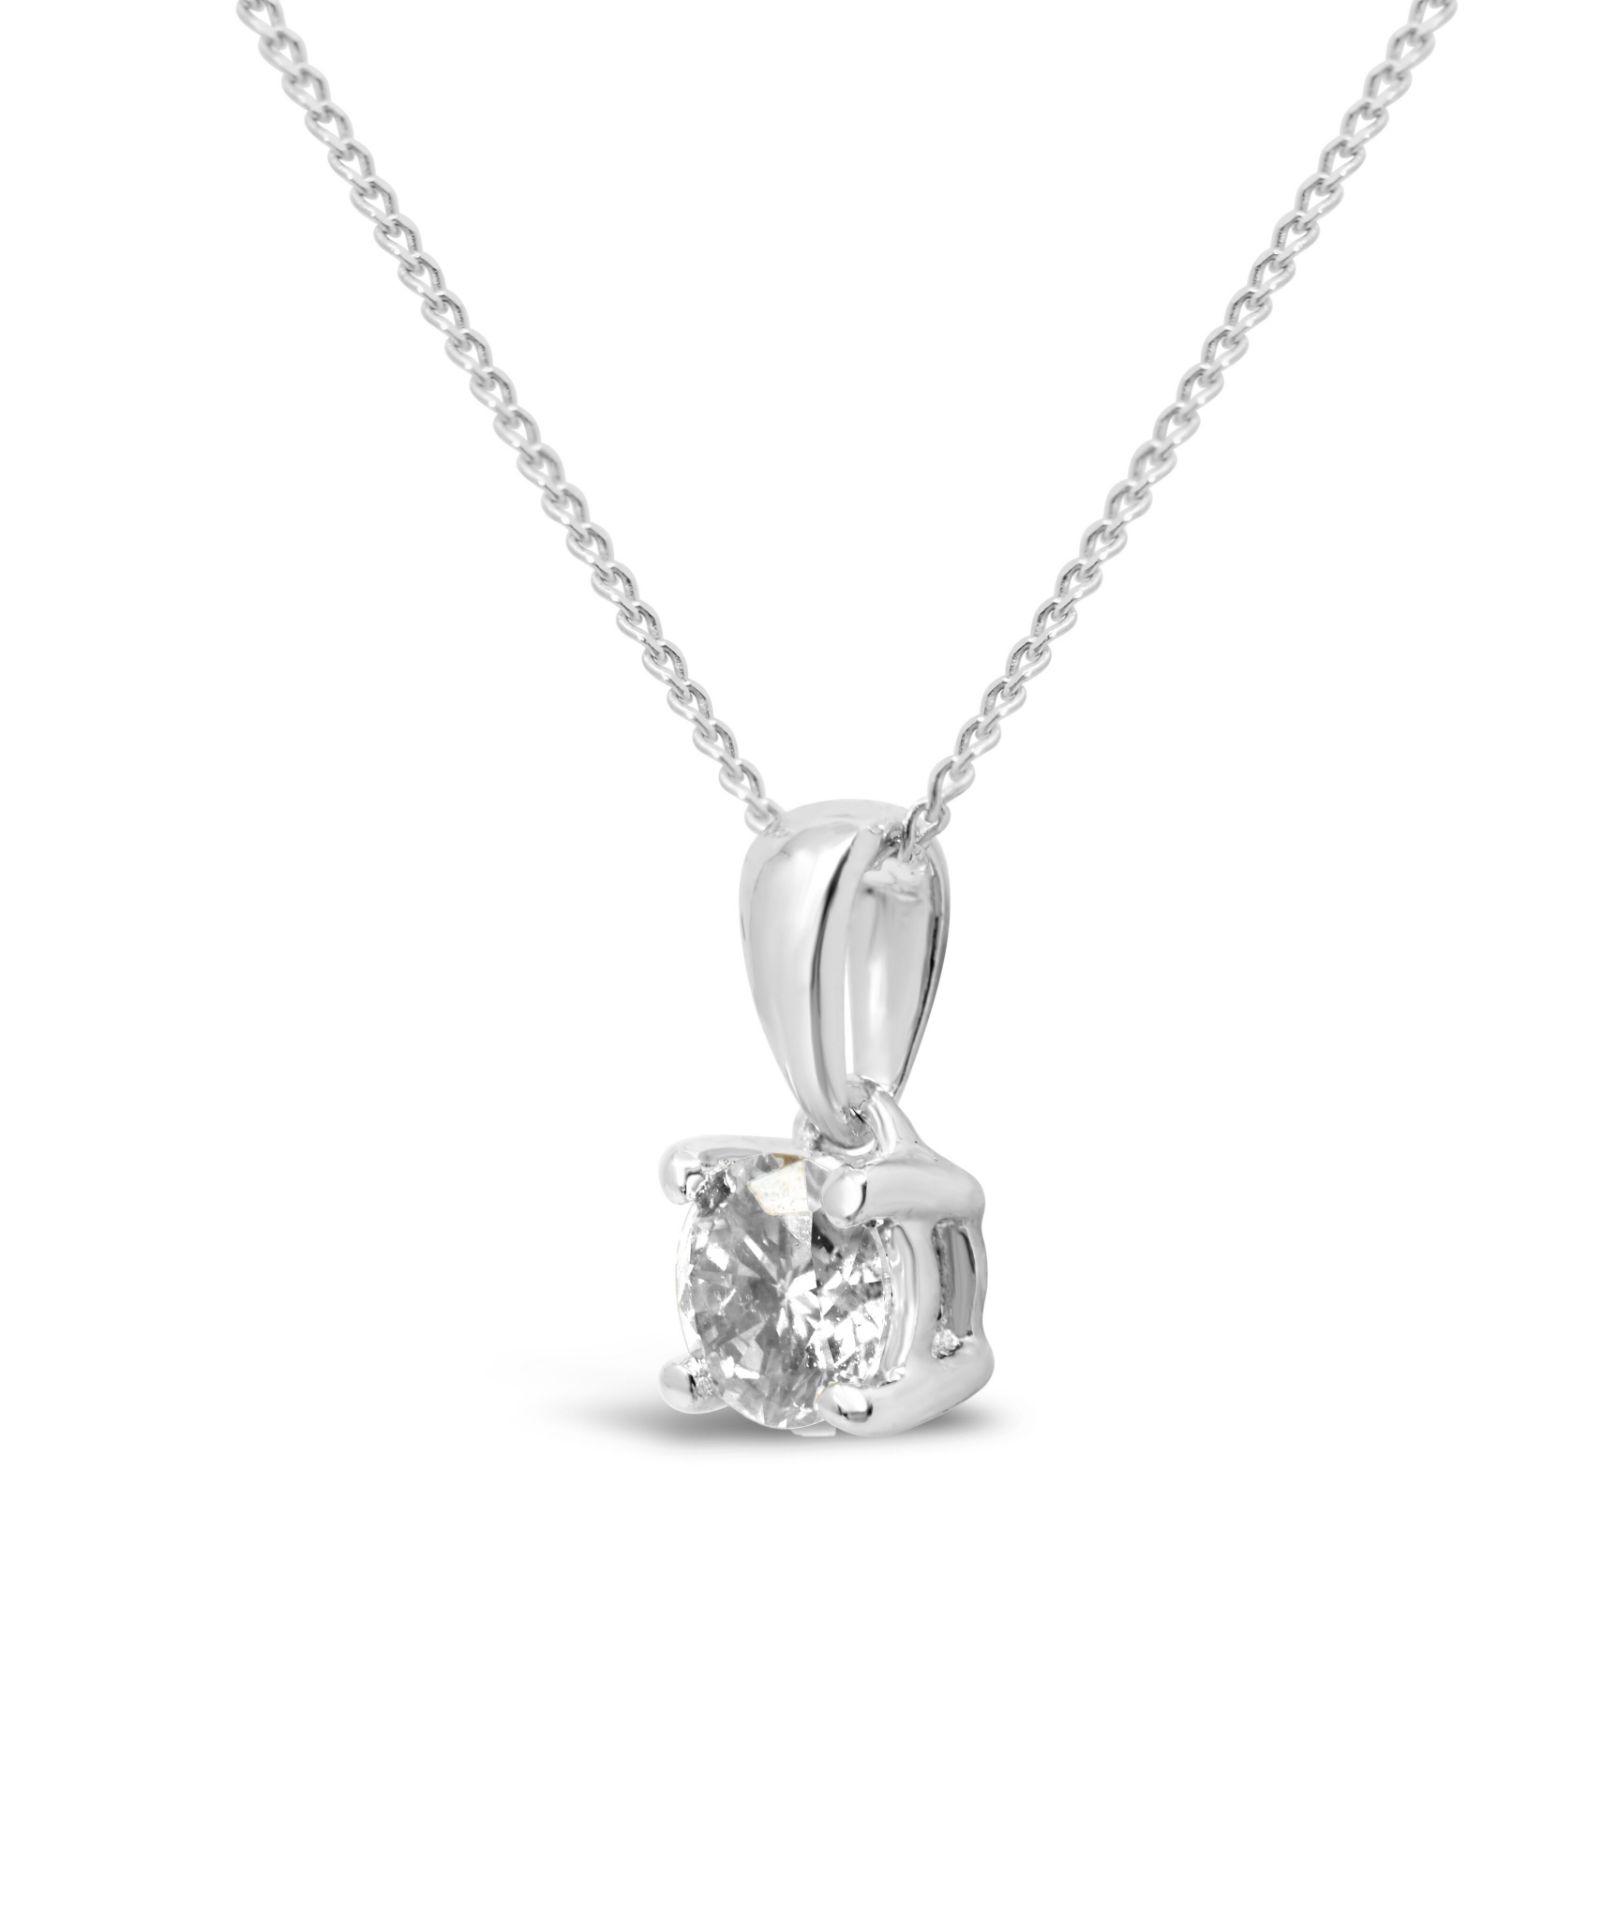 Diamond Necklace Pendant, 9ct White Gold RRP £499 Weight 0.24g, Diamond Weight 0.15ct, Colour I,